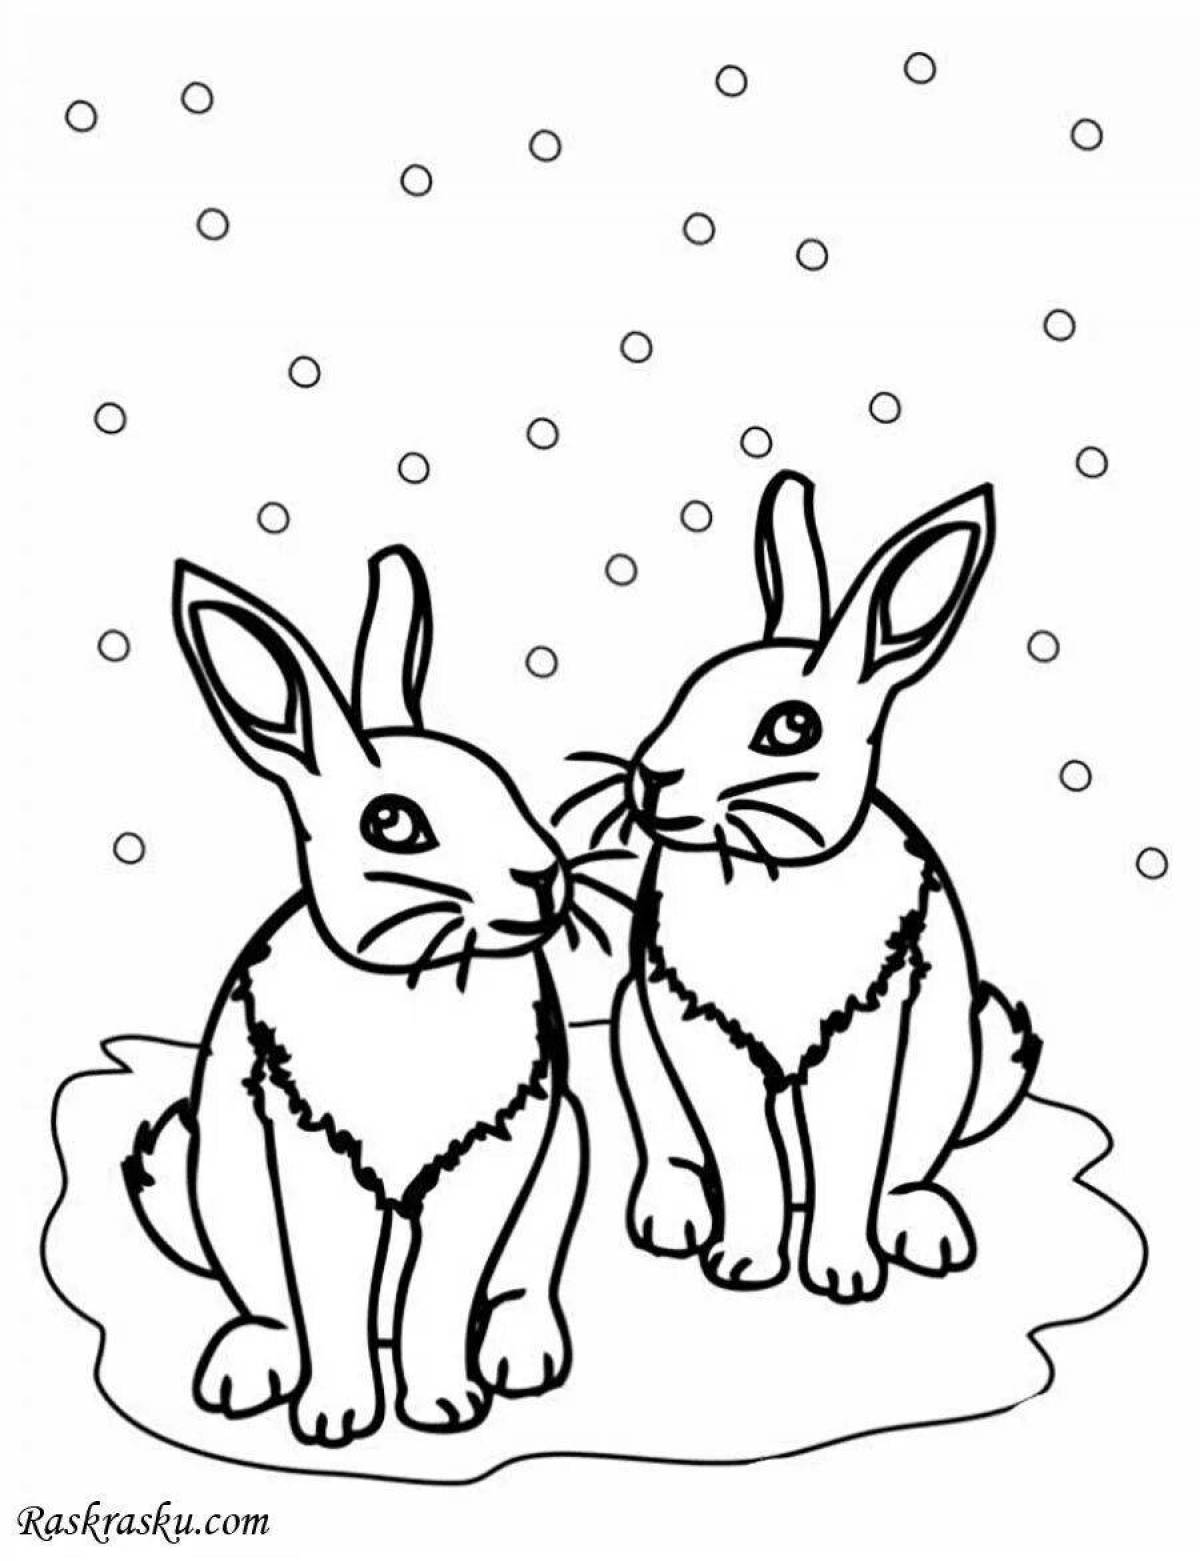 Cold rabbit coloring in winter